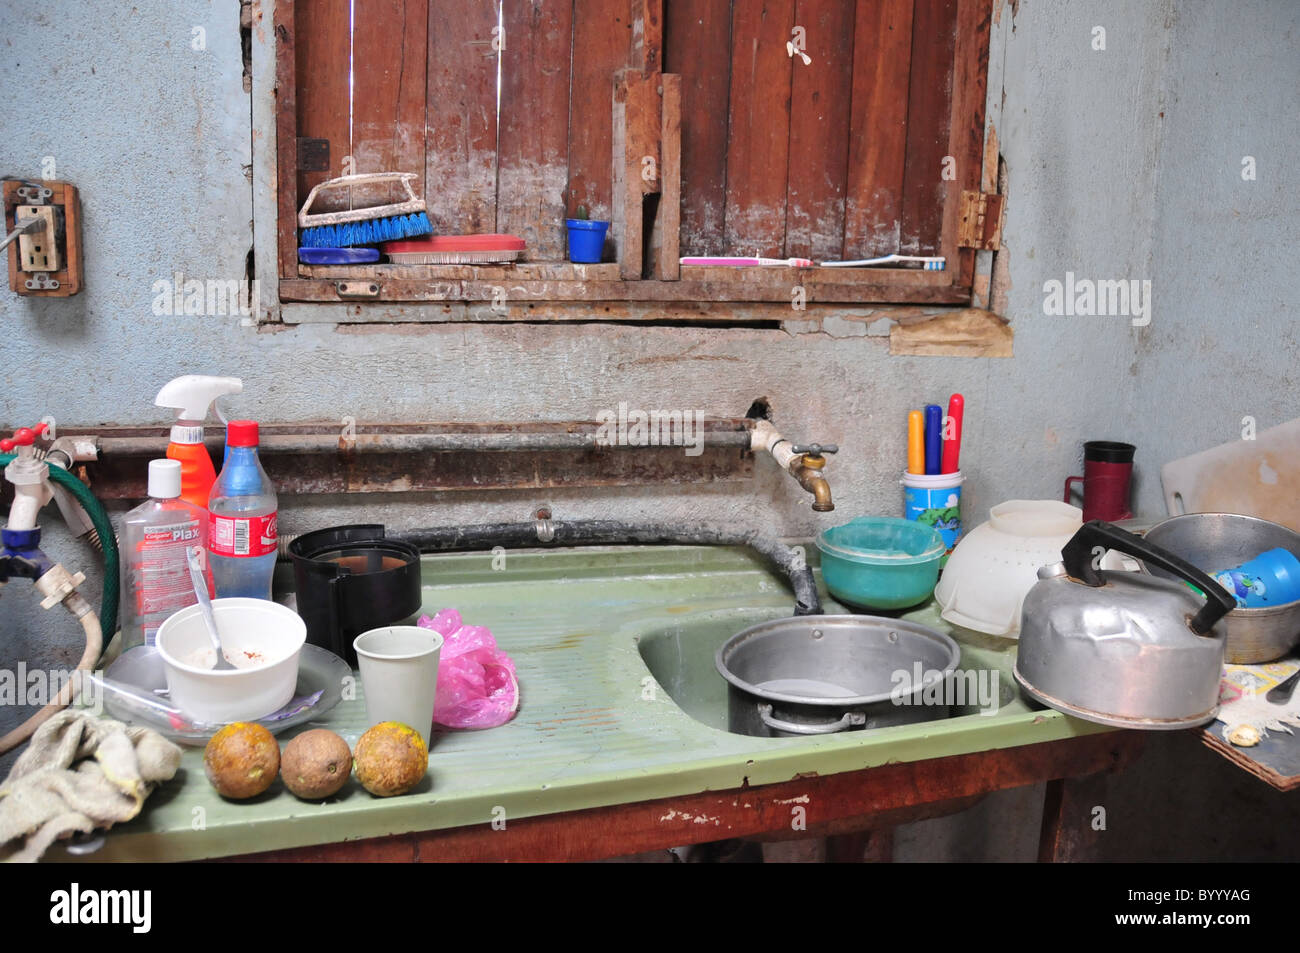 Kitchen of a poor house San José Costa Rica Stock Photo